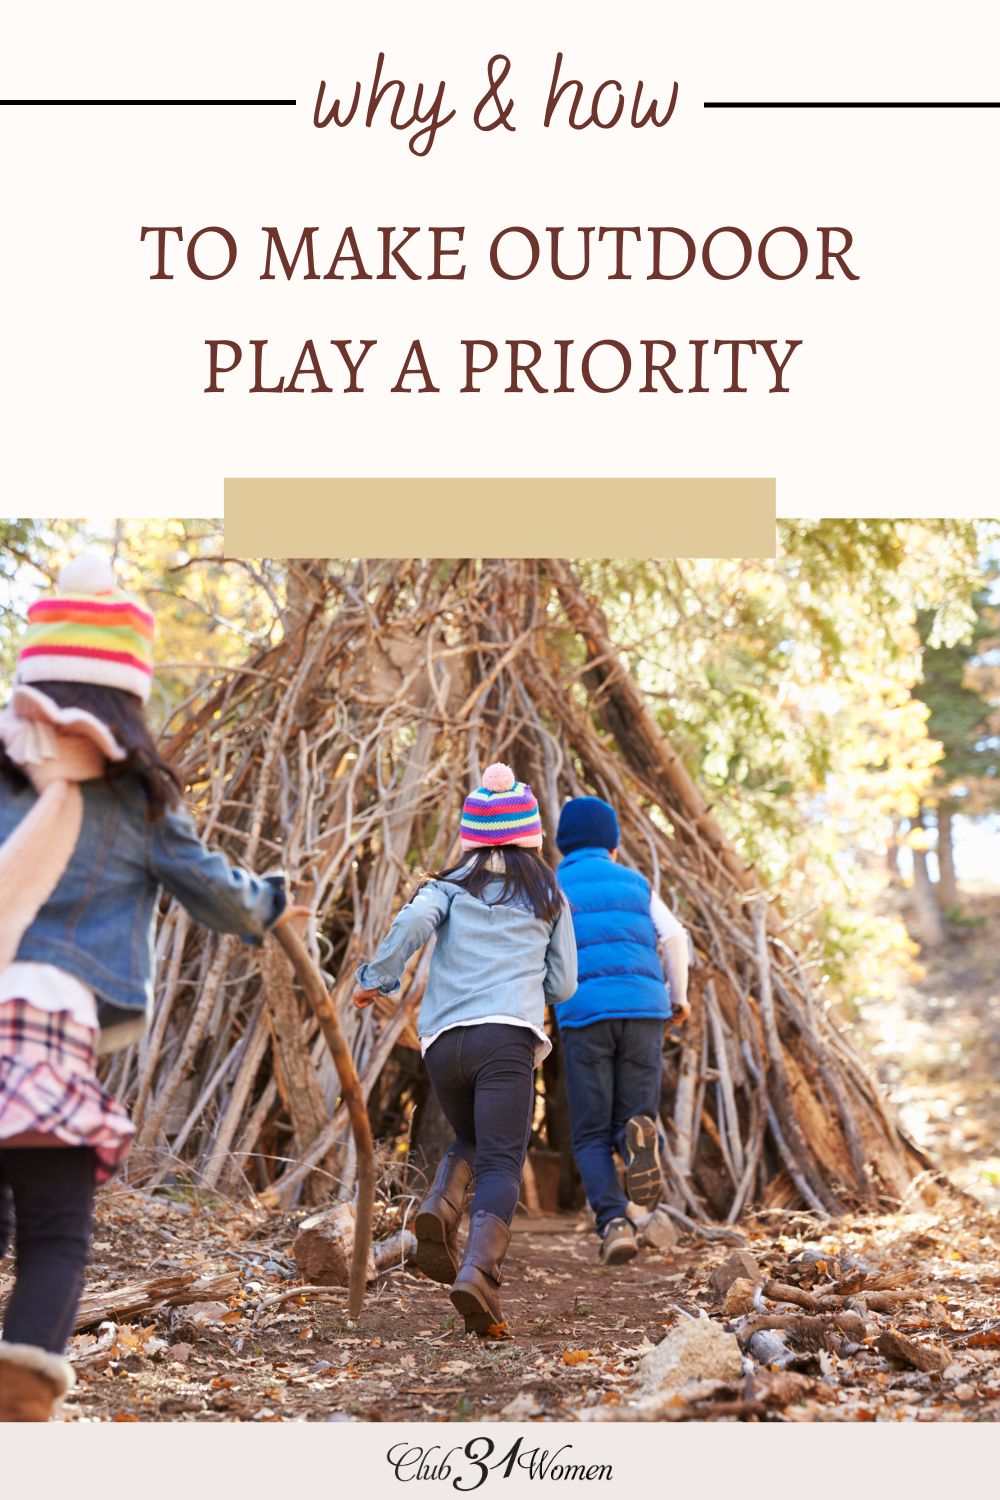 When you make outdoor play a priority, it offers you and your kids space to breathe and slow down. Nature is soothing and healing. via @Club31Women